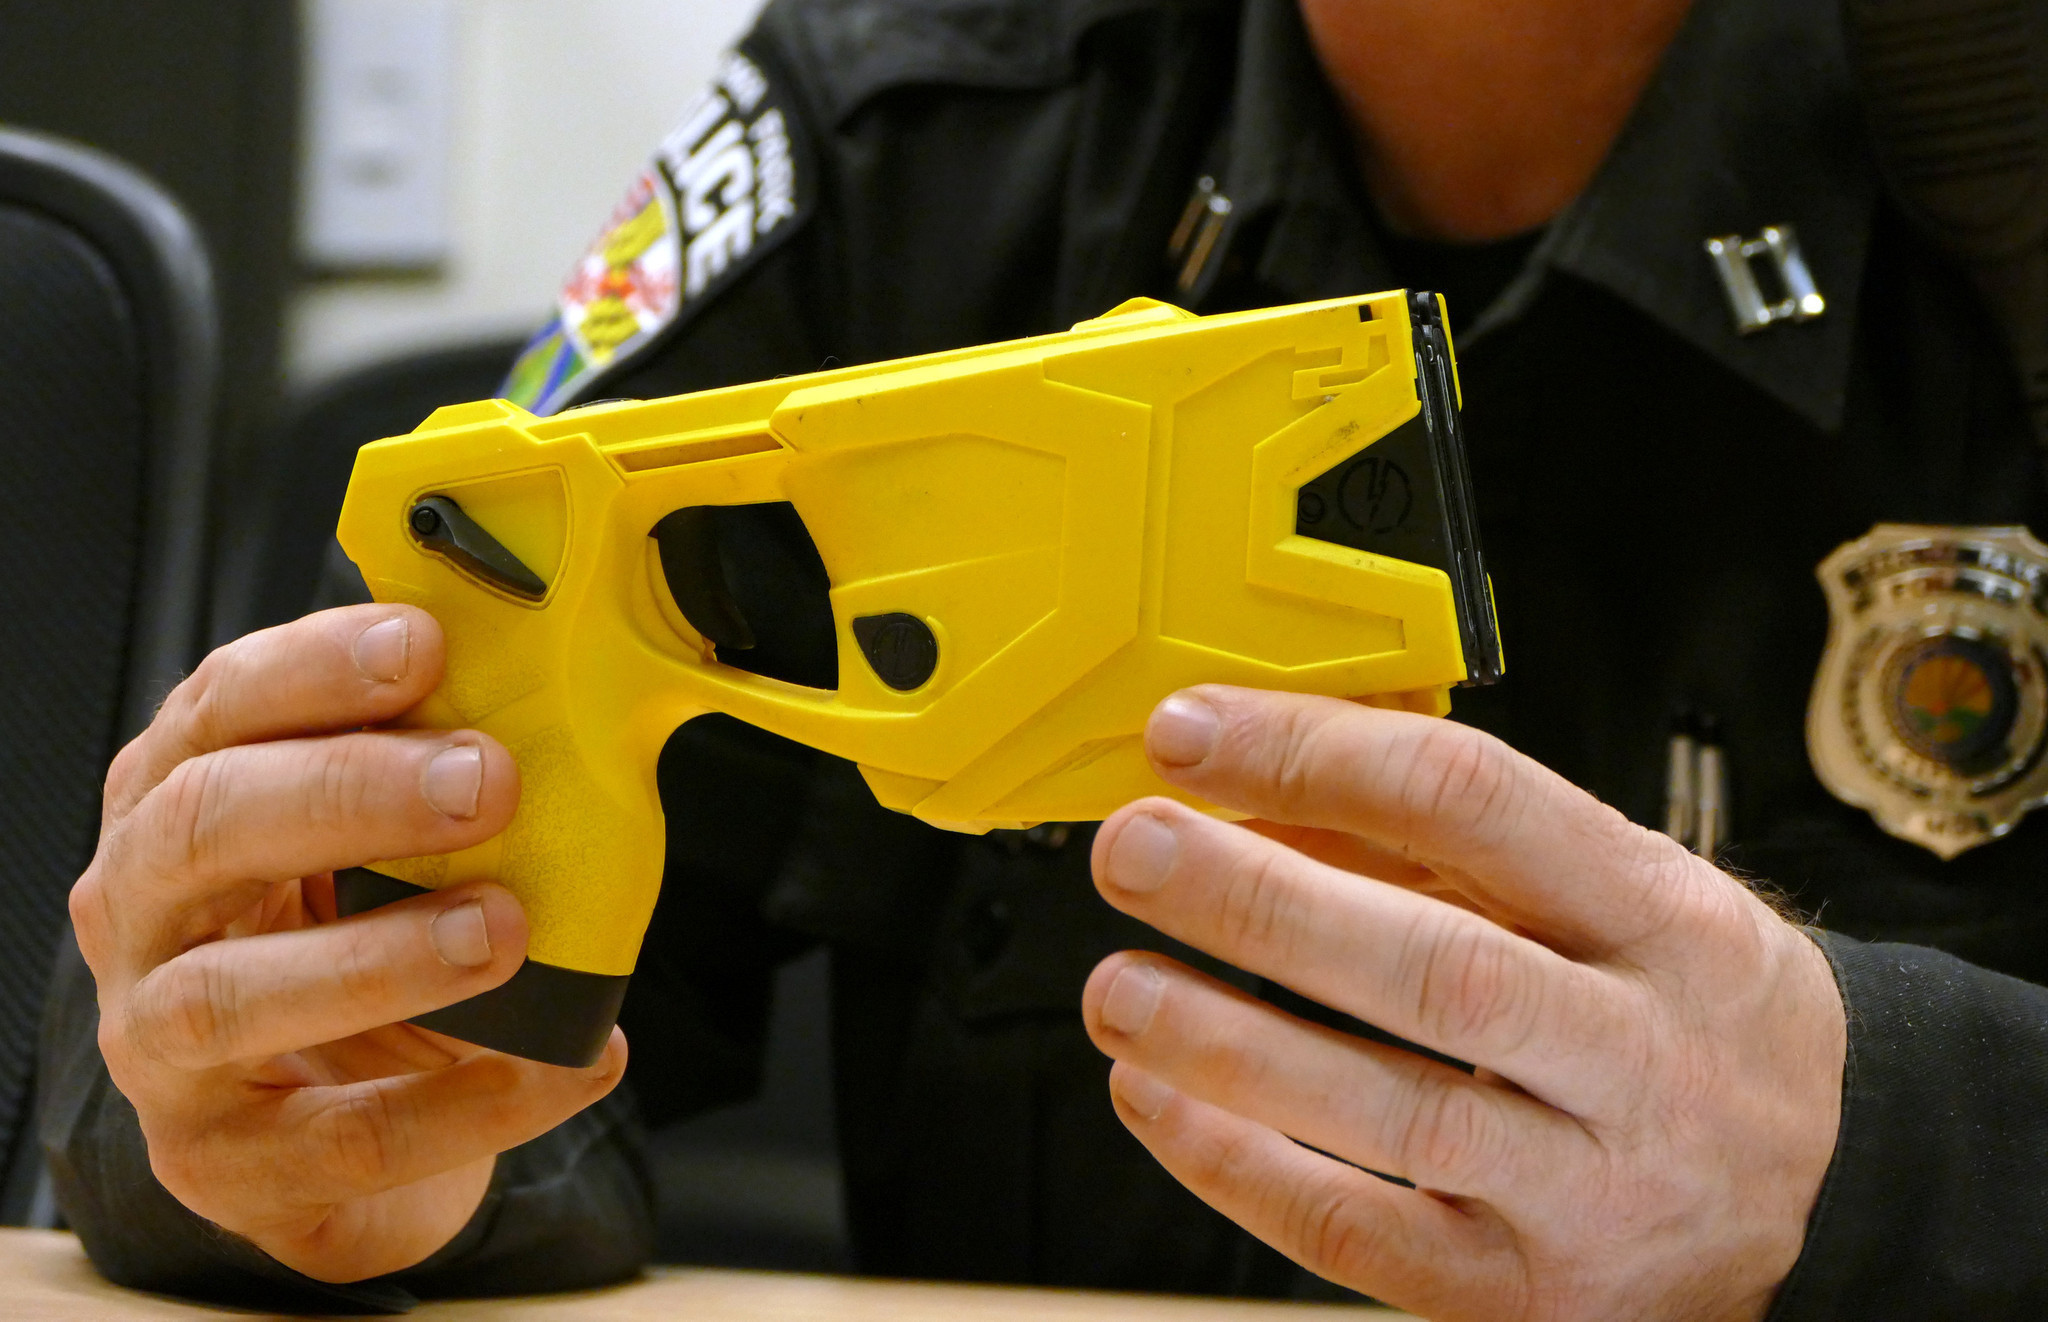 With the latest federal court ruling on police use of Tasers, a South Carol...